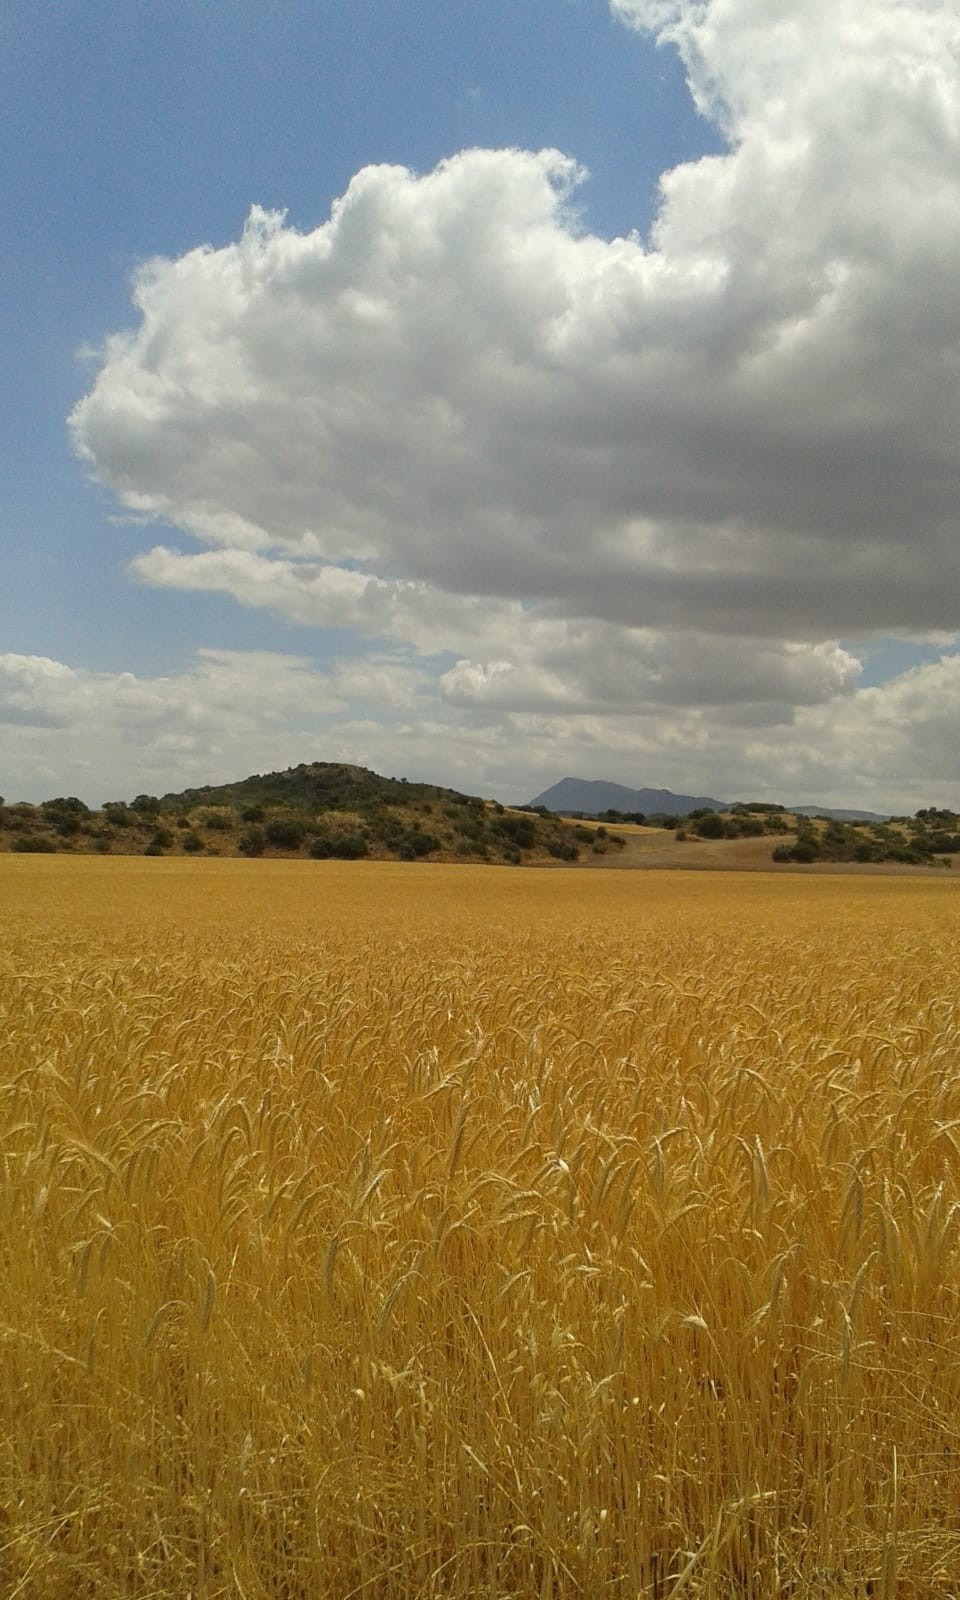 Huge finca of 298 hectares (298.000 square meters) located 21 kms West of Antequera, between Bobadilla and Campillos, destined for agricultural use.